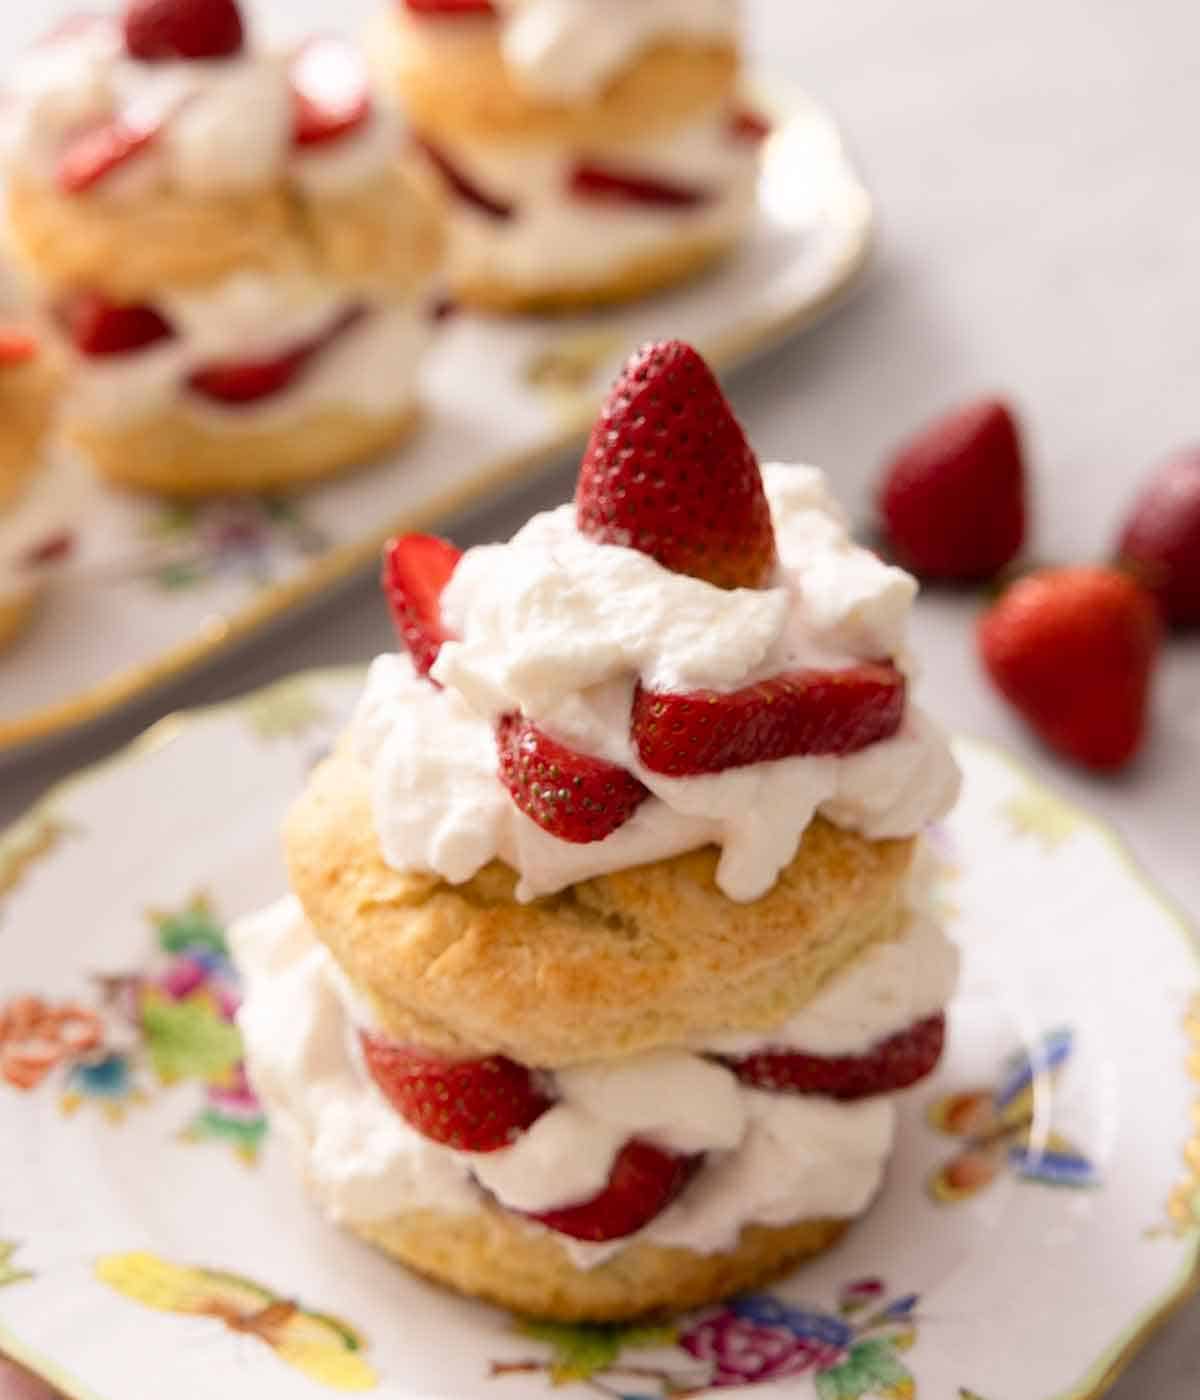 A strawberry short cake topped with whipped cream and strawberries.